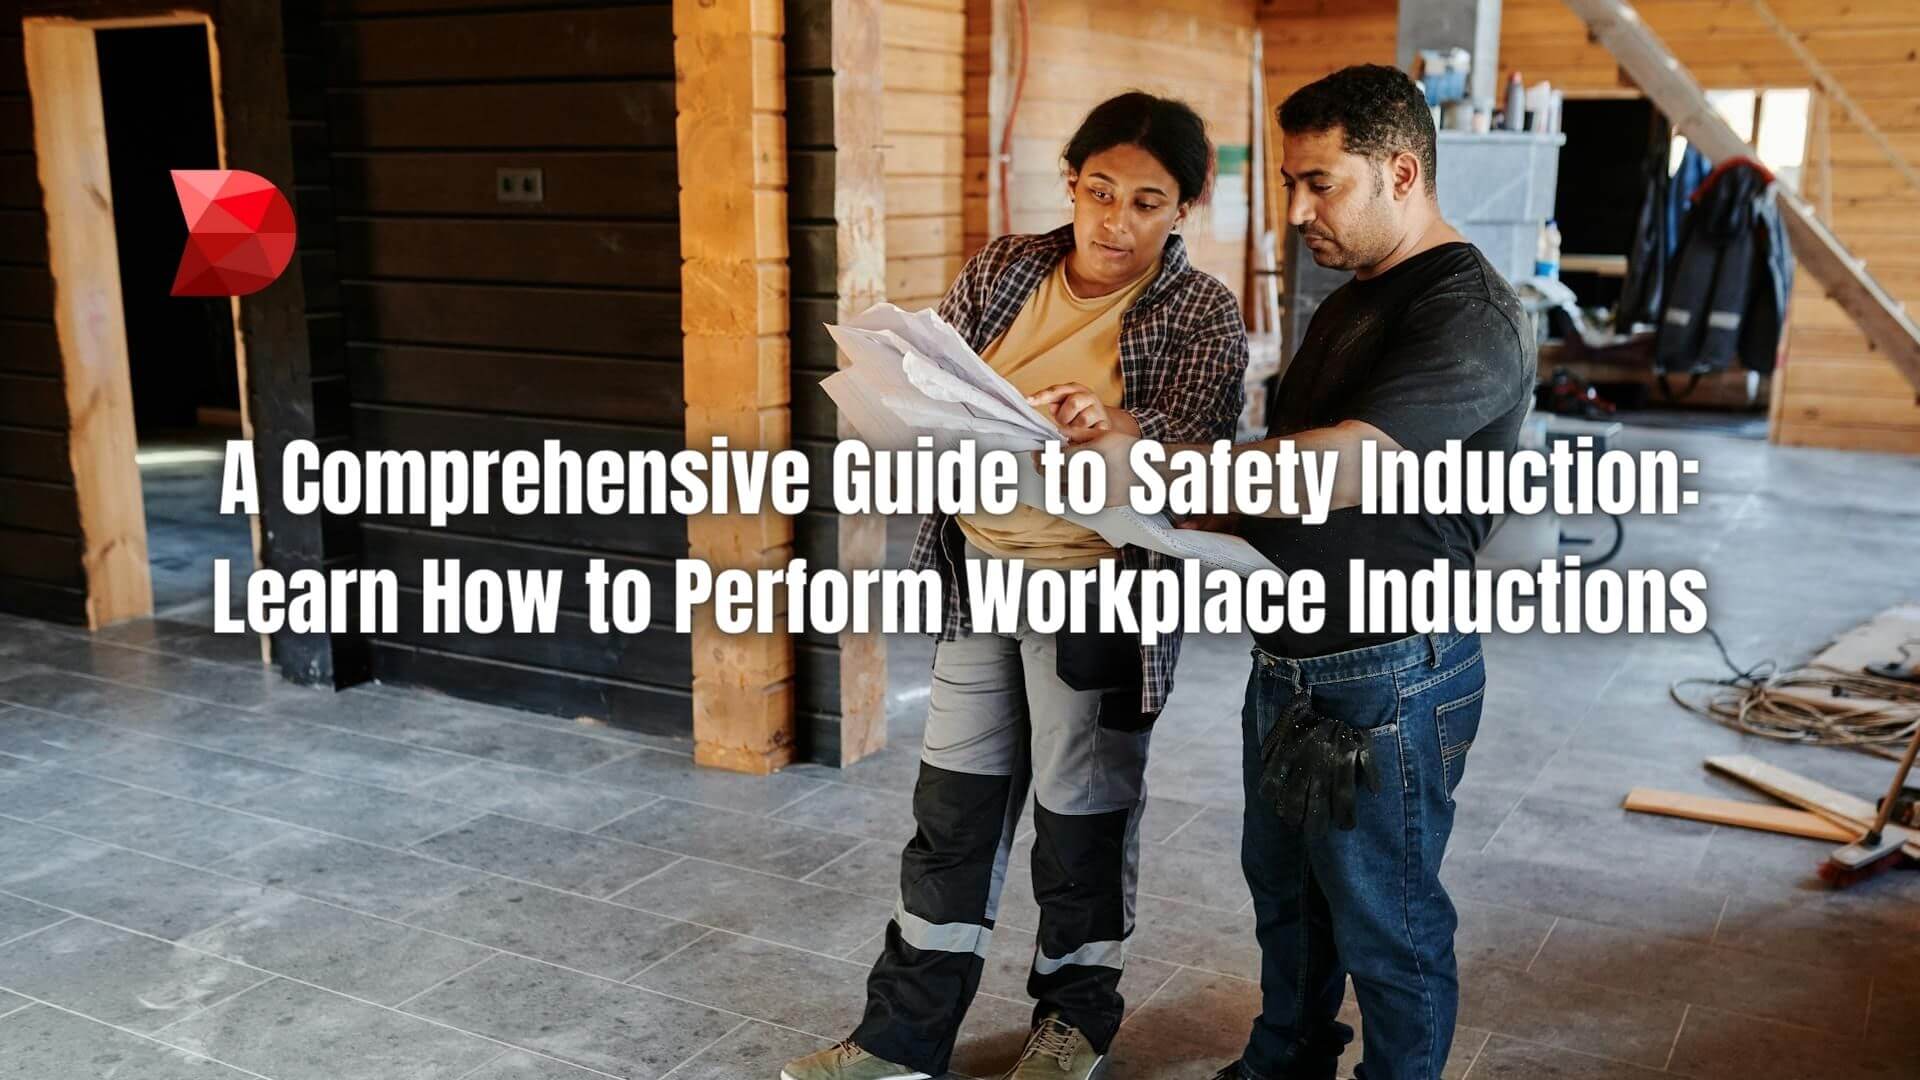 Master the art of safety induction with our expert guide! Learn essential techniques for conducting effective workplace inductions.